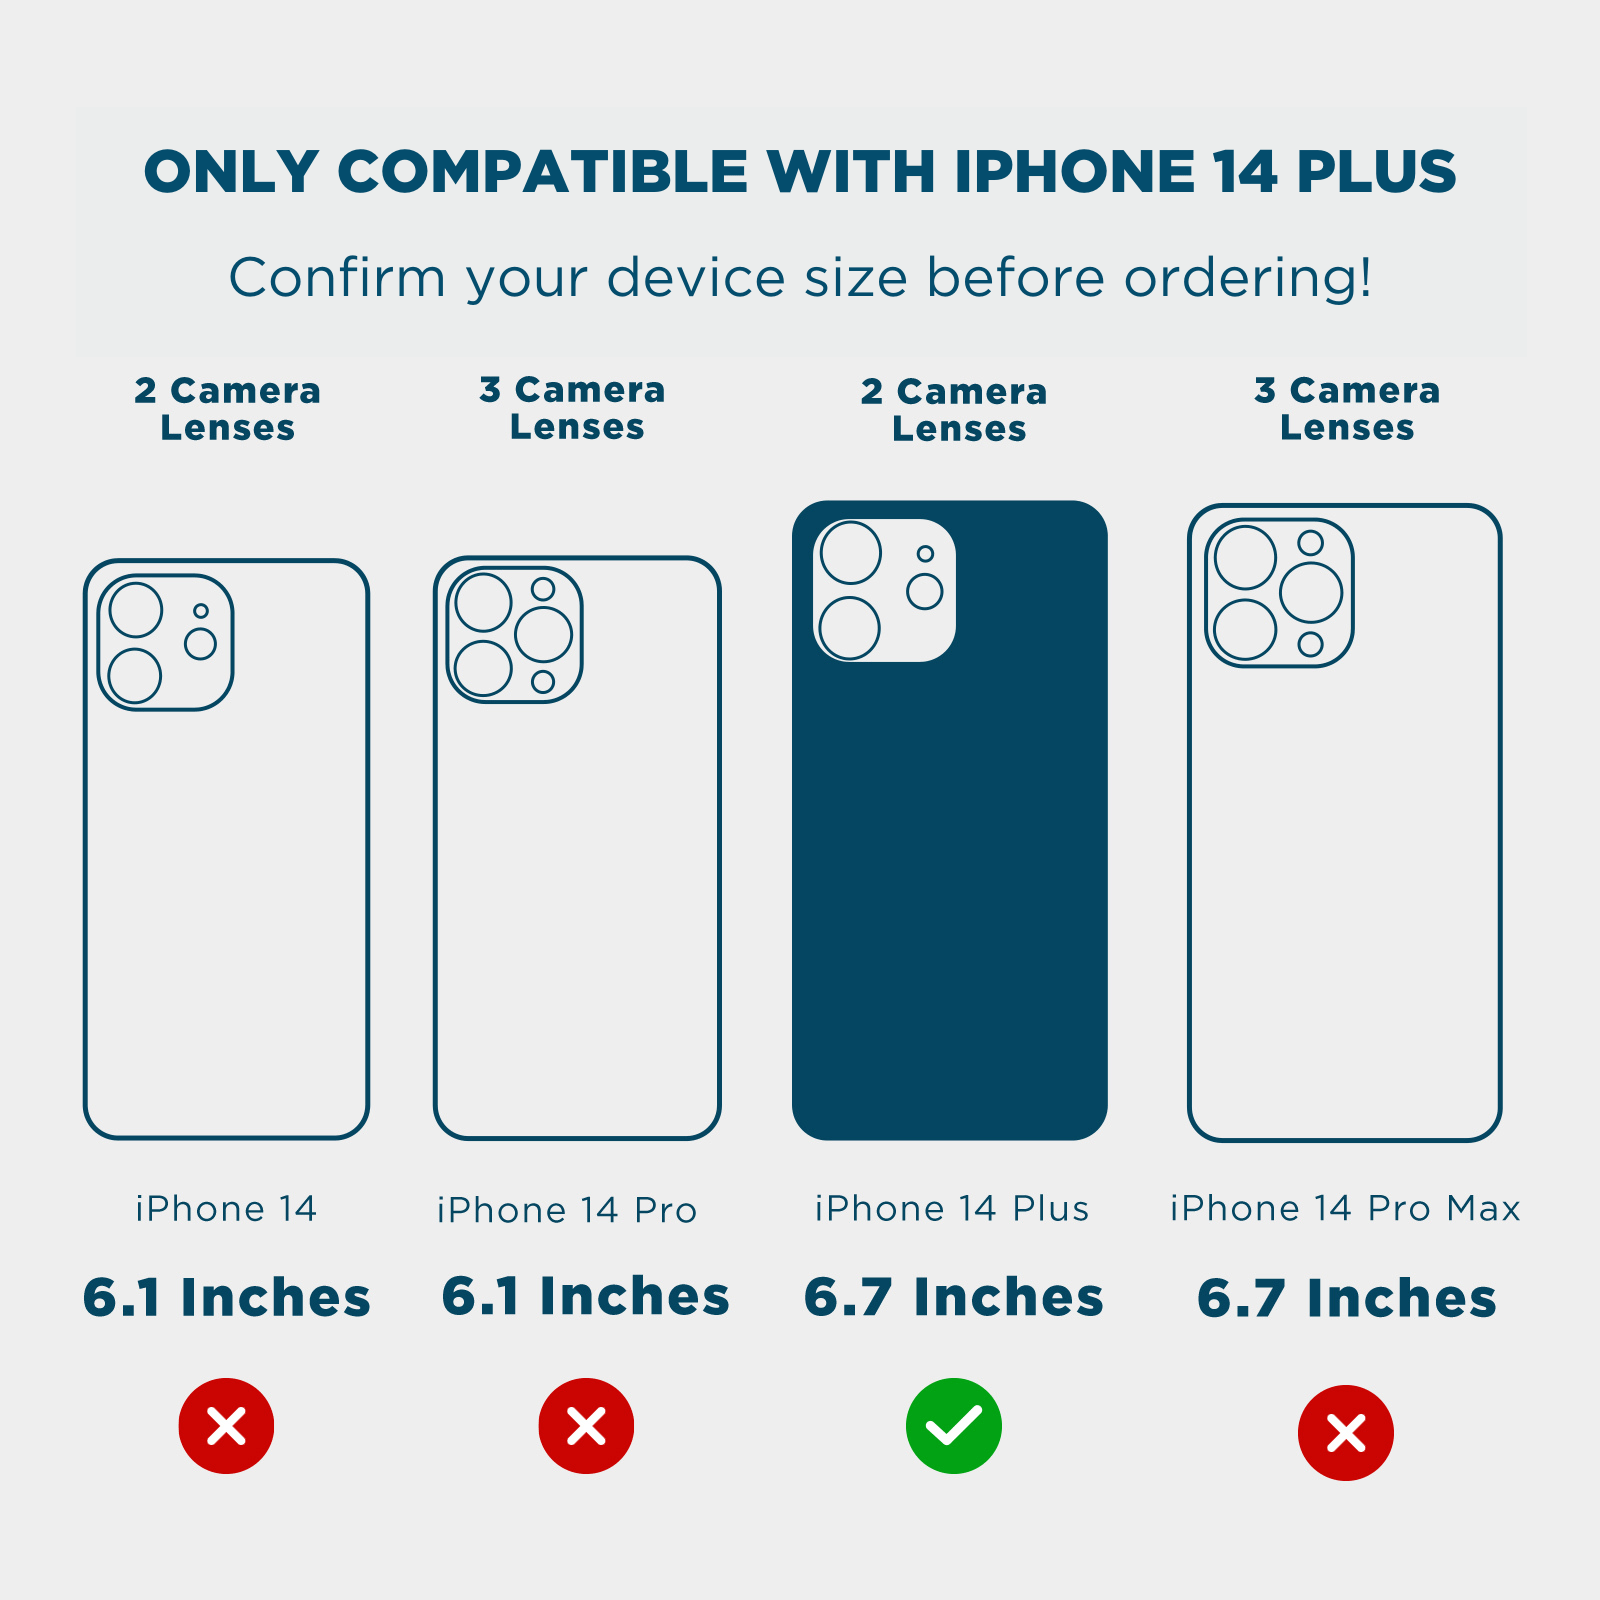 ONLY COMPATIBLE WITH IPHONE 14 PLUS. CONFIRM YOUR DEVICE SIZE BEFORE ORDERING! 2 CAMERA LENSES, 3 CAMERA LENSES, 2 CAMERA LENSES, 3 CAMERA LENSES, 6.1 INCHEC, 6.1 INCHES, 6.7 INCHES, 6.7 INCHES. COLOR::BLACK